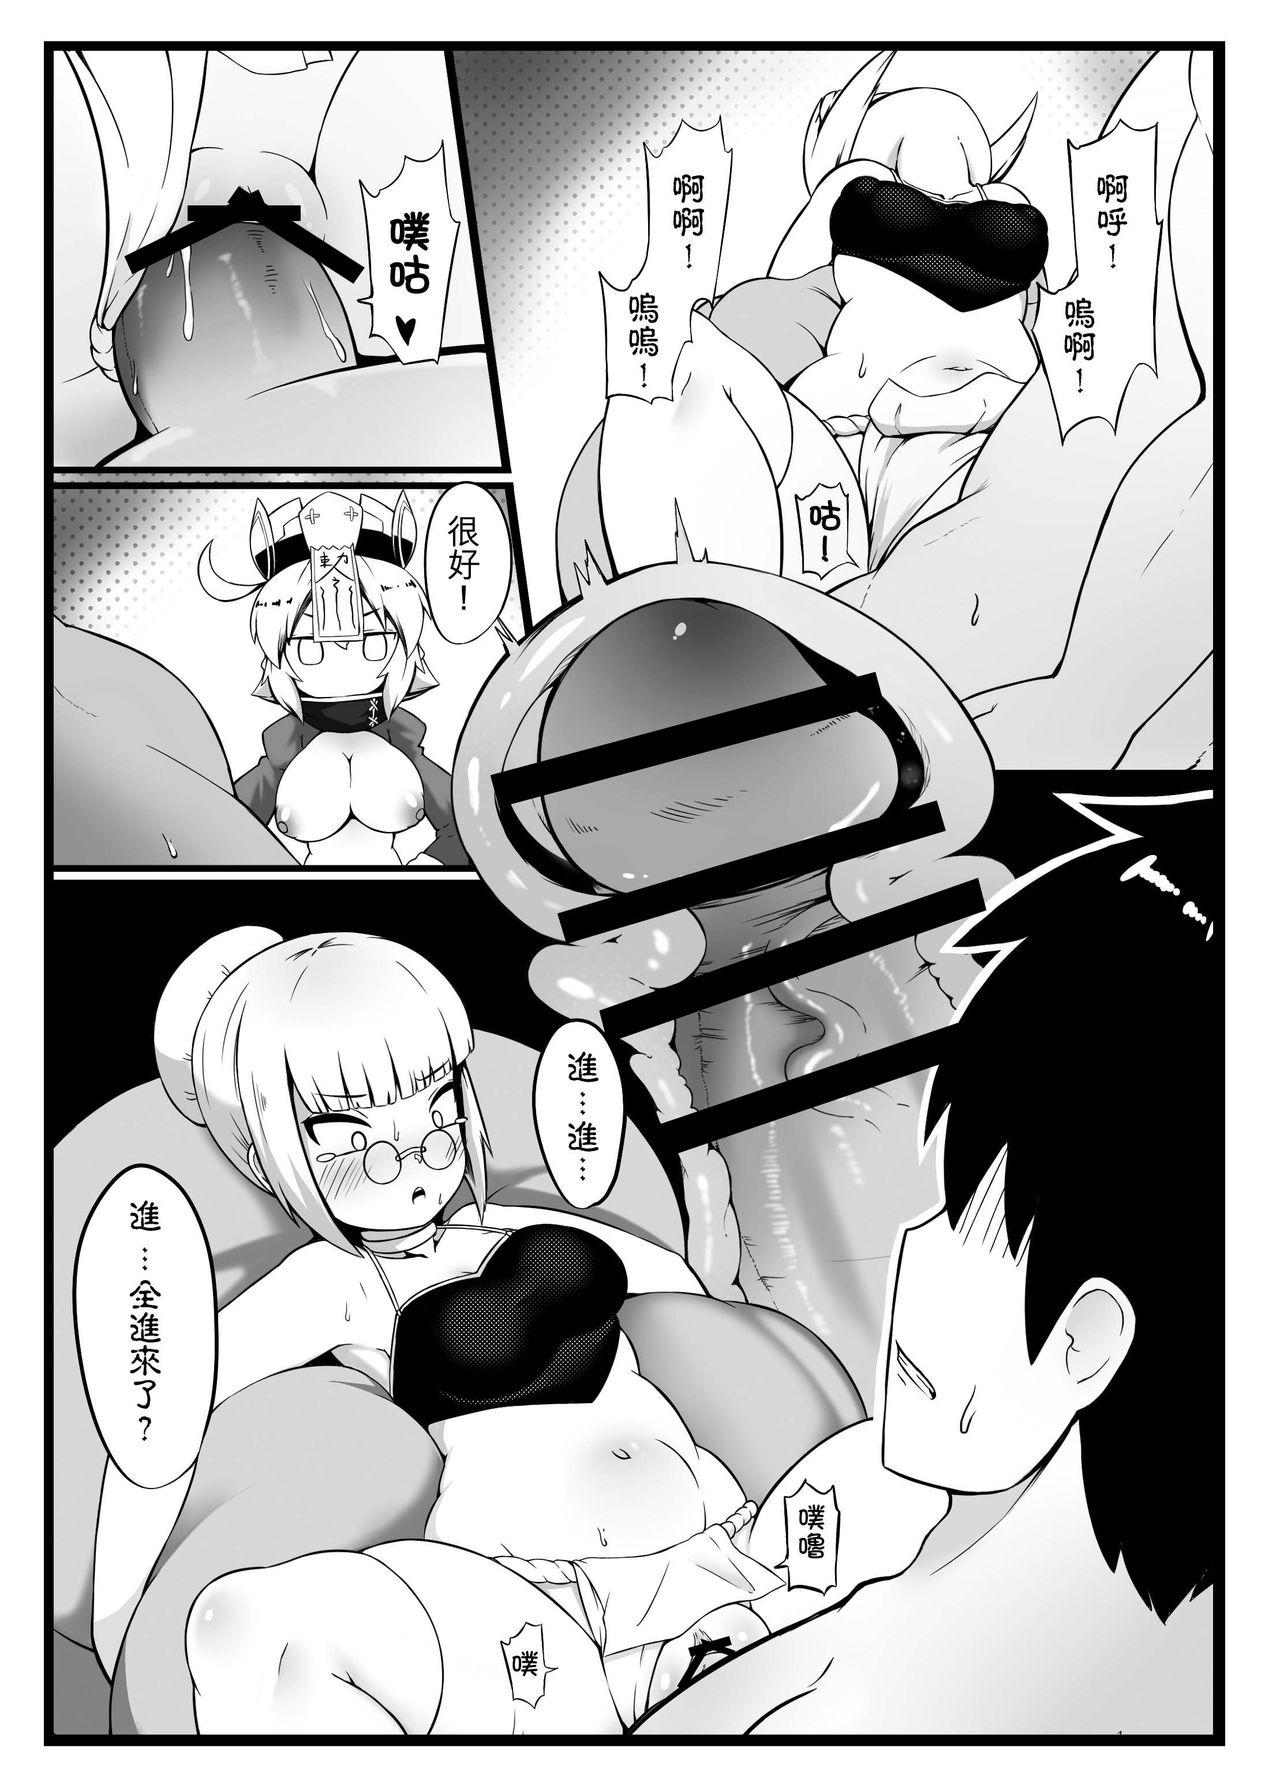 Deep Throat Make baby with my oppai loli old aunt 3 - Original Spy - Page 11